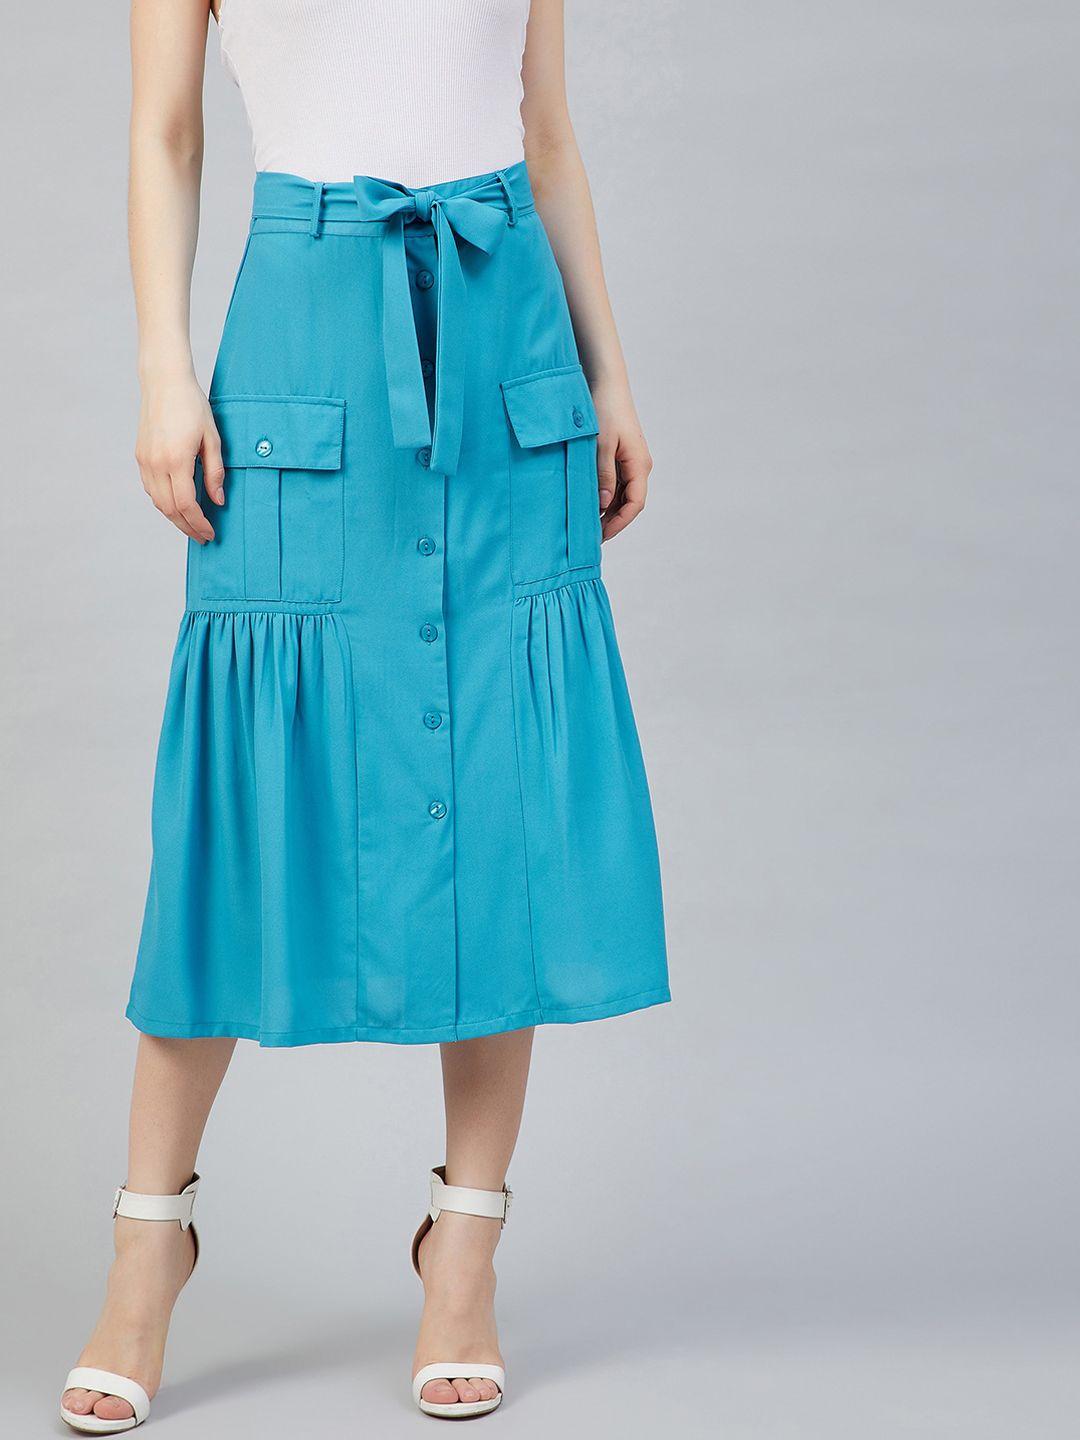 marie-claire-women-blue-solid-a-line-midi-skirt